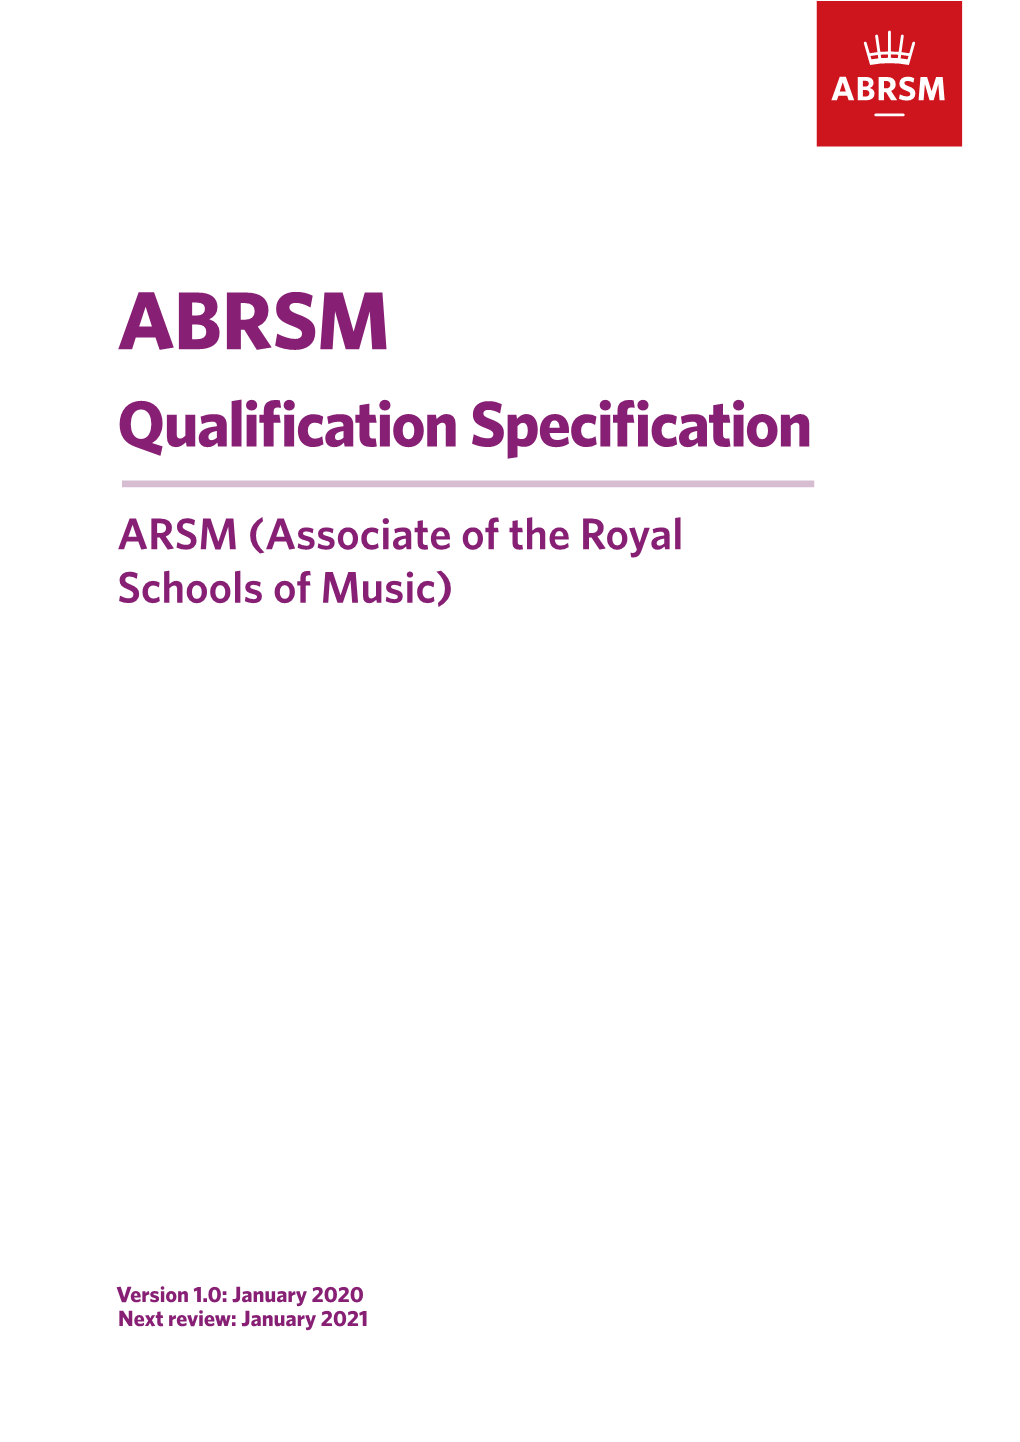 ARSM (Associate of the Royal Schools of Music)